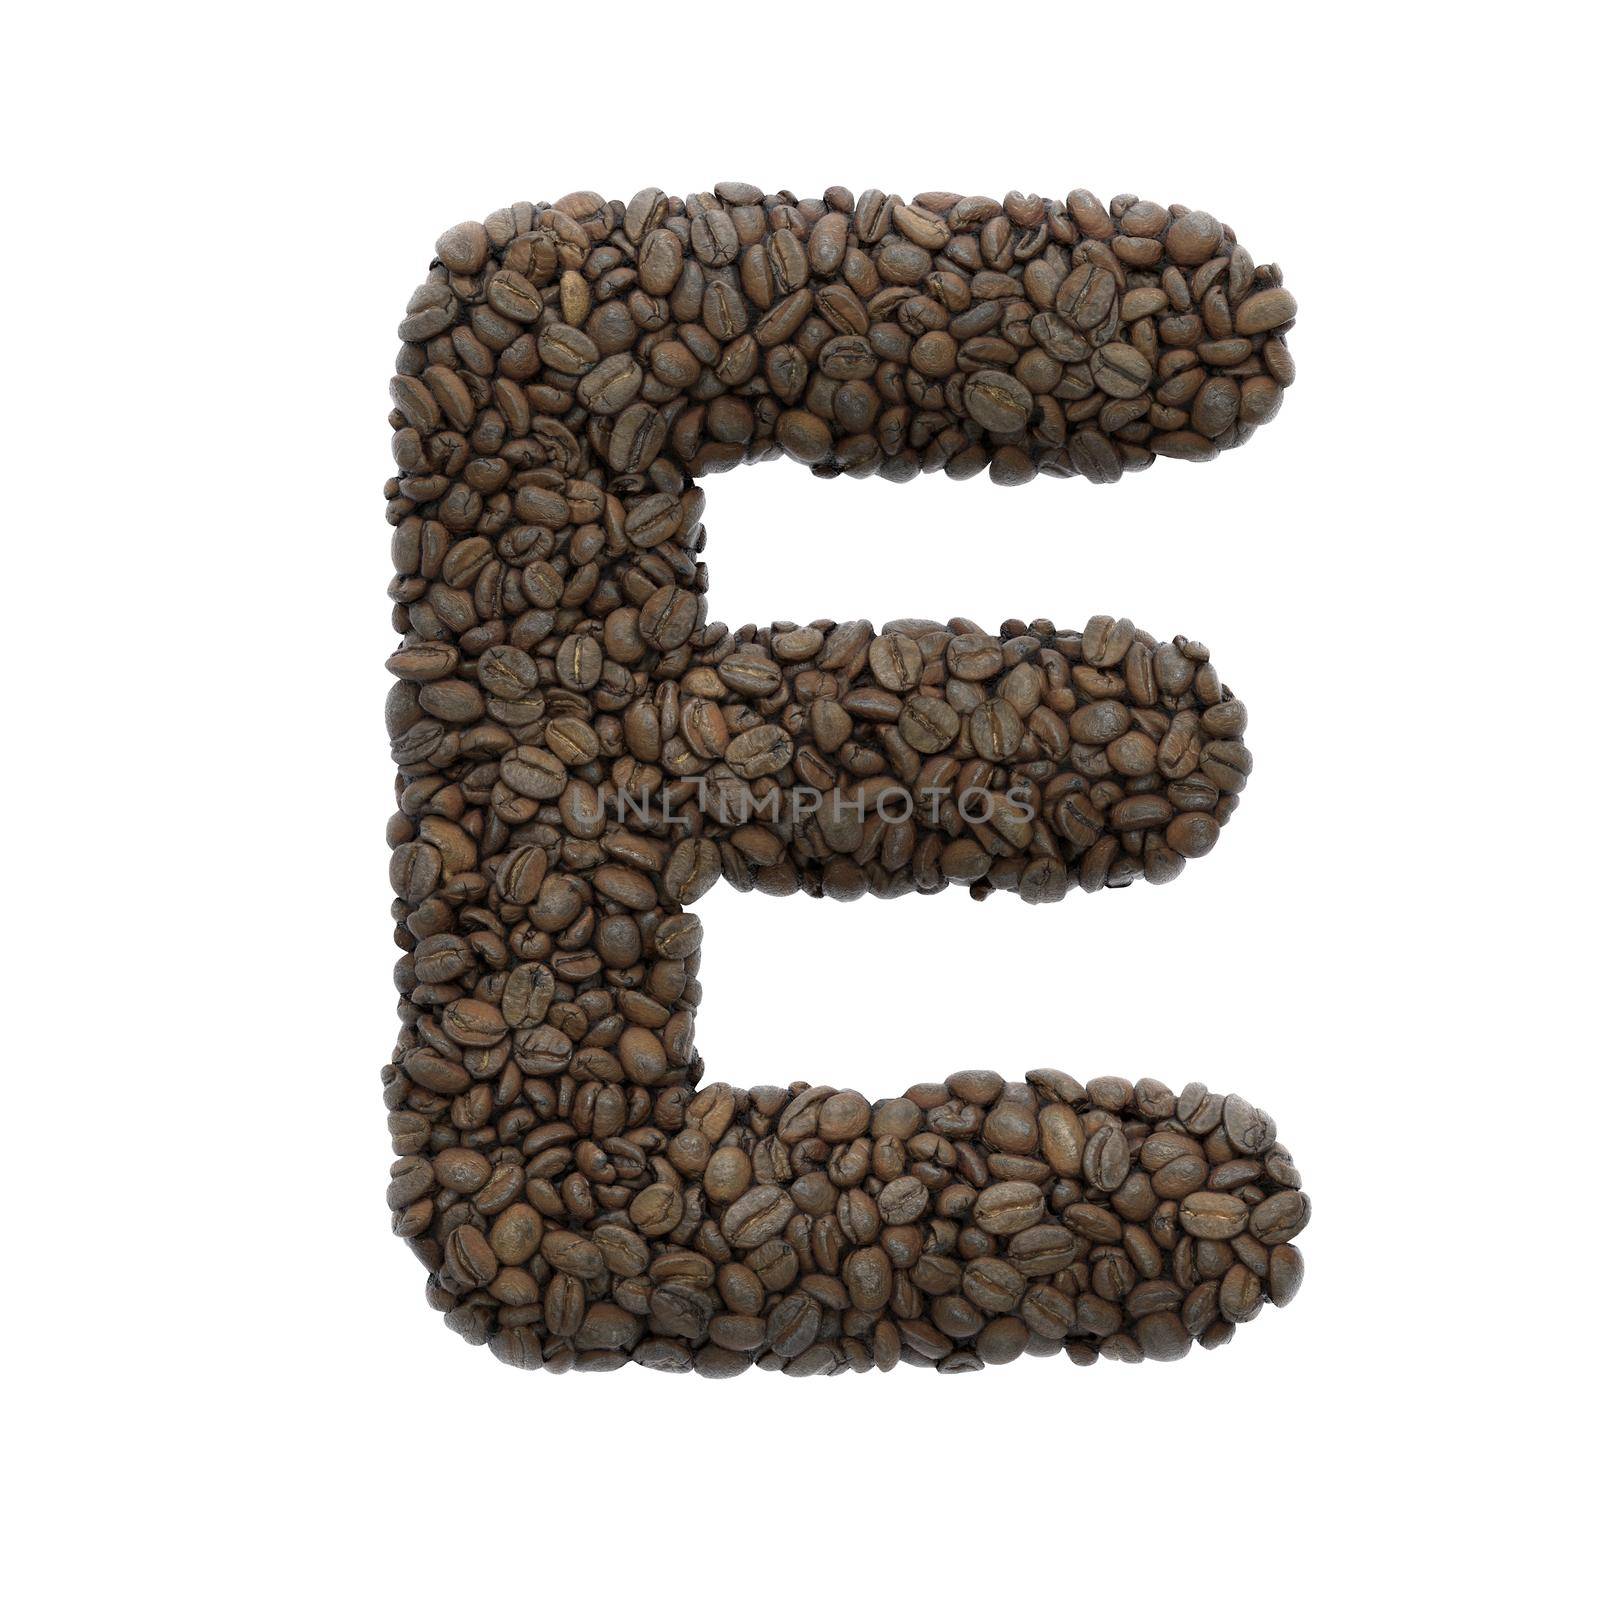 Coffee letter E - Capital 3d roasted beans font - suitable for Coffee, energy or insomnia related subjects by chrisroll